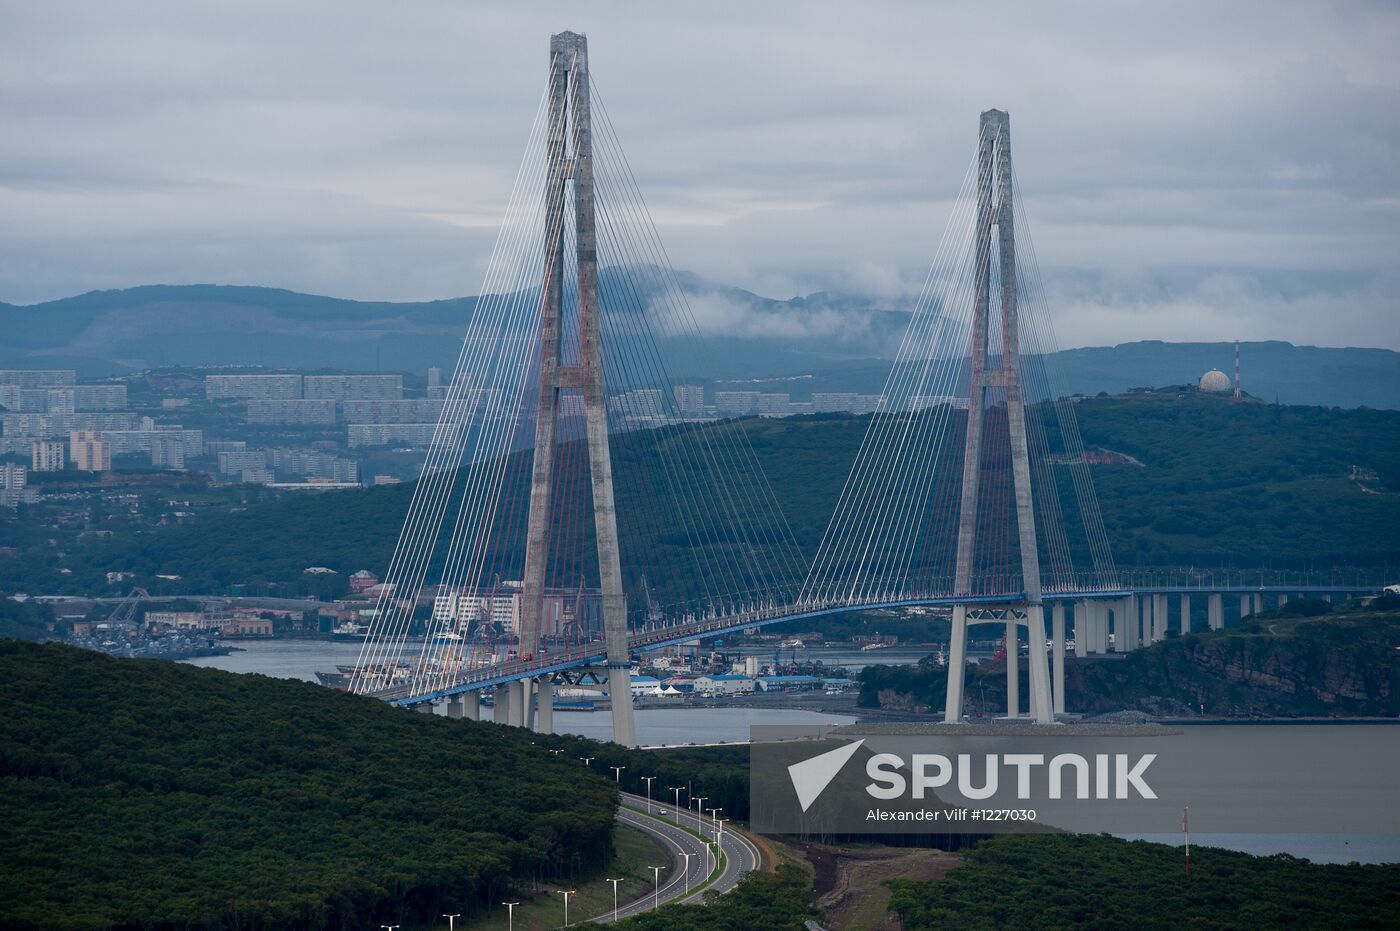 Helicopter view of Russky Island and Vladivostok